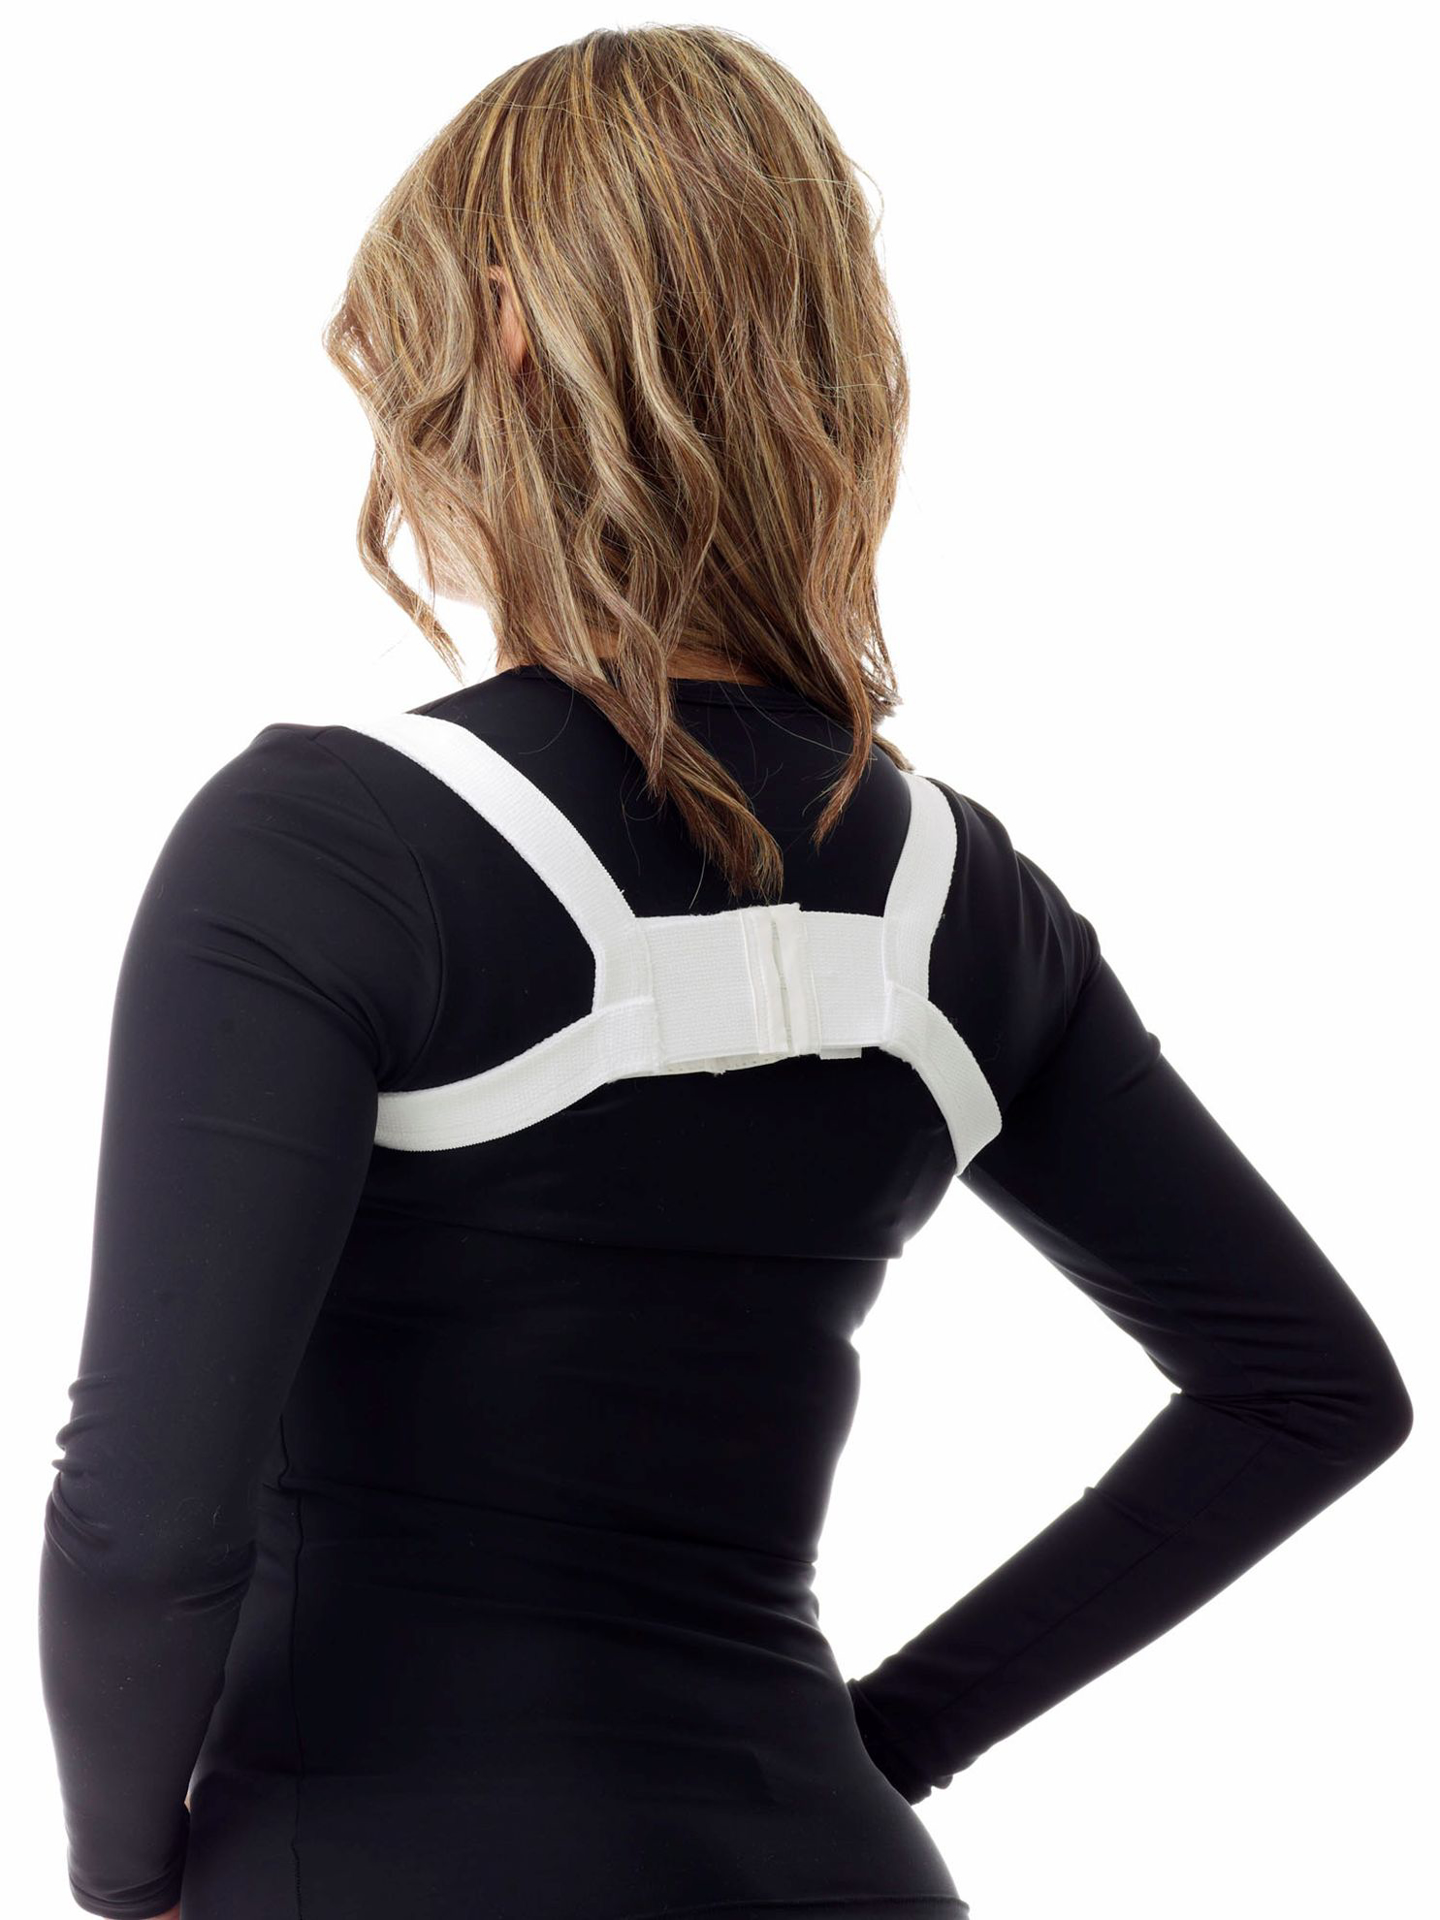 Post Delivery Abdominal Binder 9-inch with Velcro Closure. Men Compression  Shirts, Girdles, Chest Binders, Hernia Garments